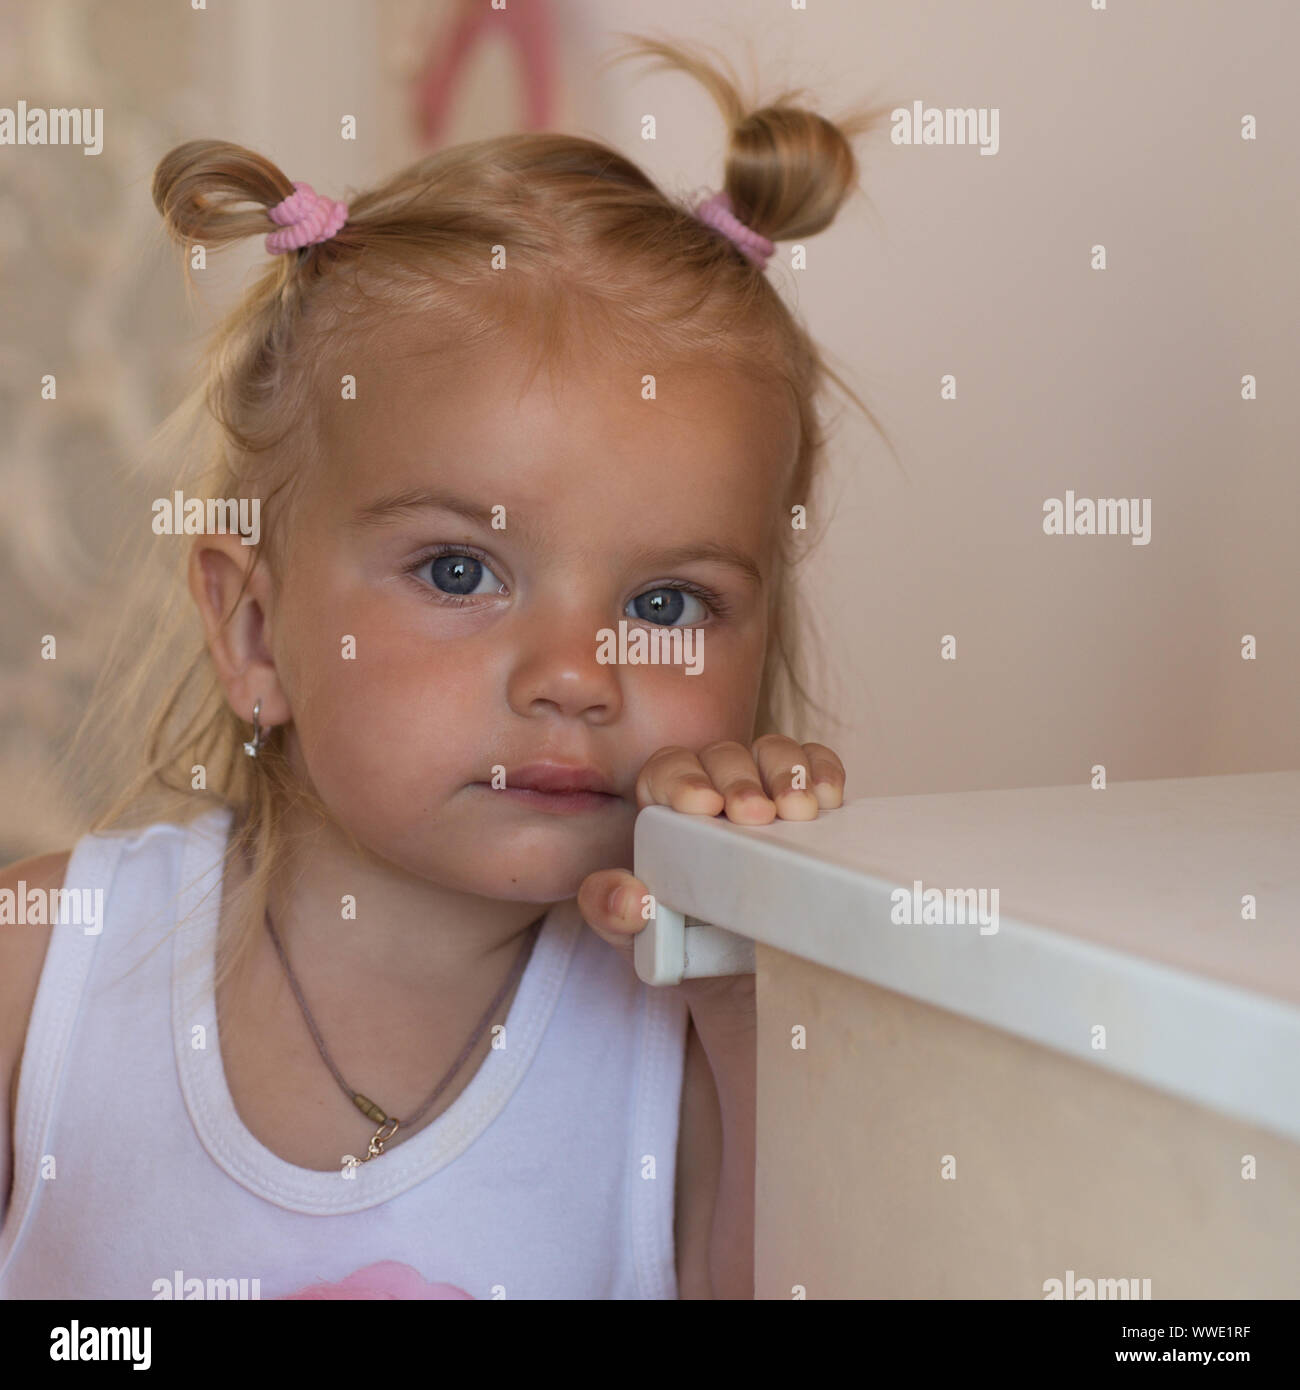 The hairstyle is beautiful. Small child wear funny hairstyle. Small girl  with bun ponytails. Adorable child with blond hair. Fancy girls hairstyle.  Ha Stock Photo - Alamy